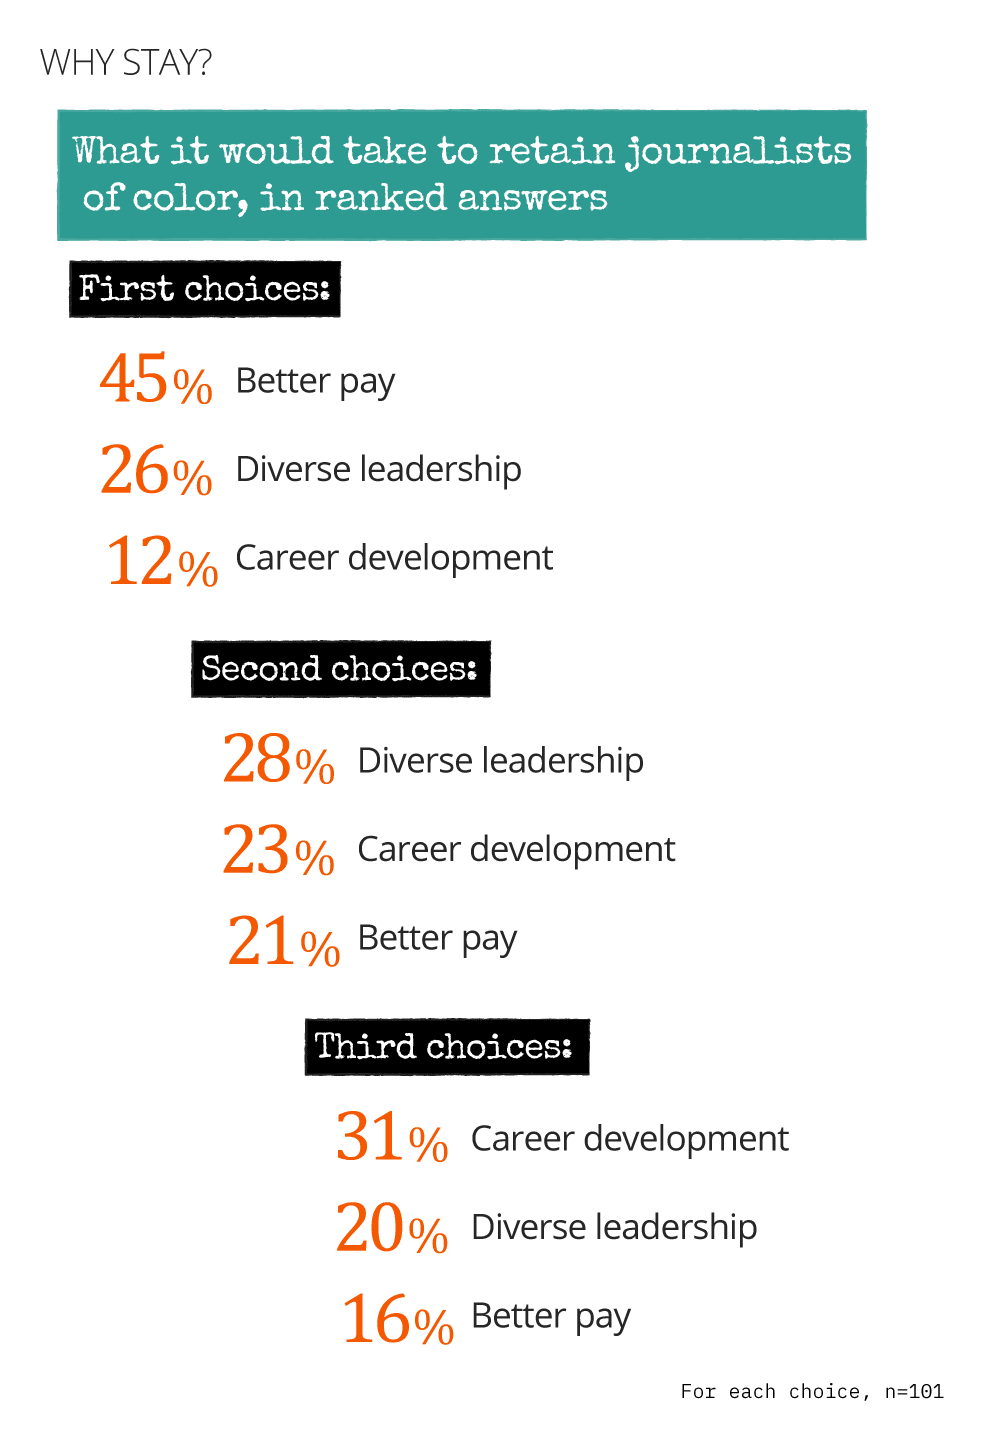 Top reasons that could keep leavers in journalism, better pay, diverse leadership, career development 